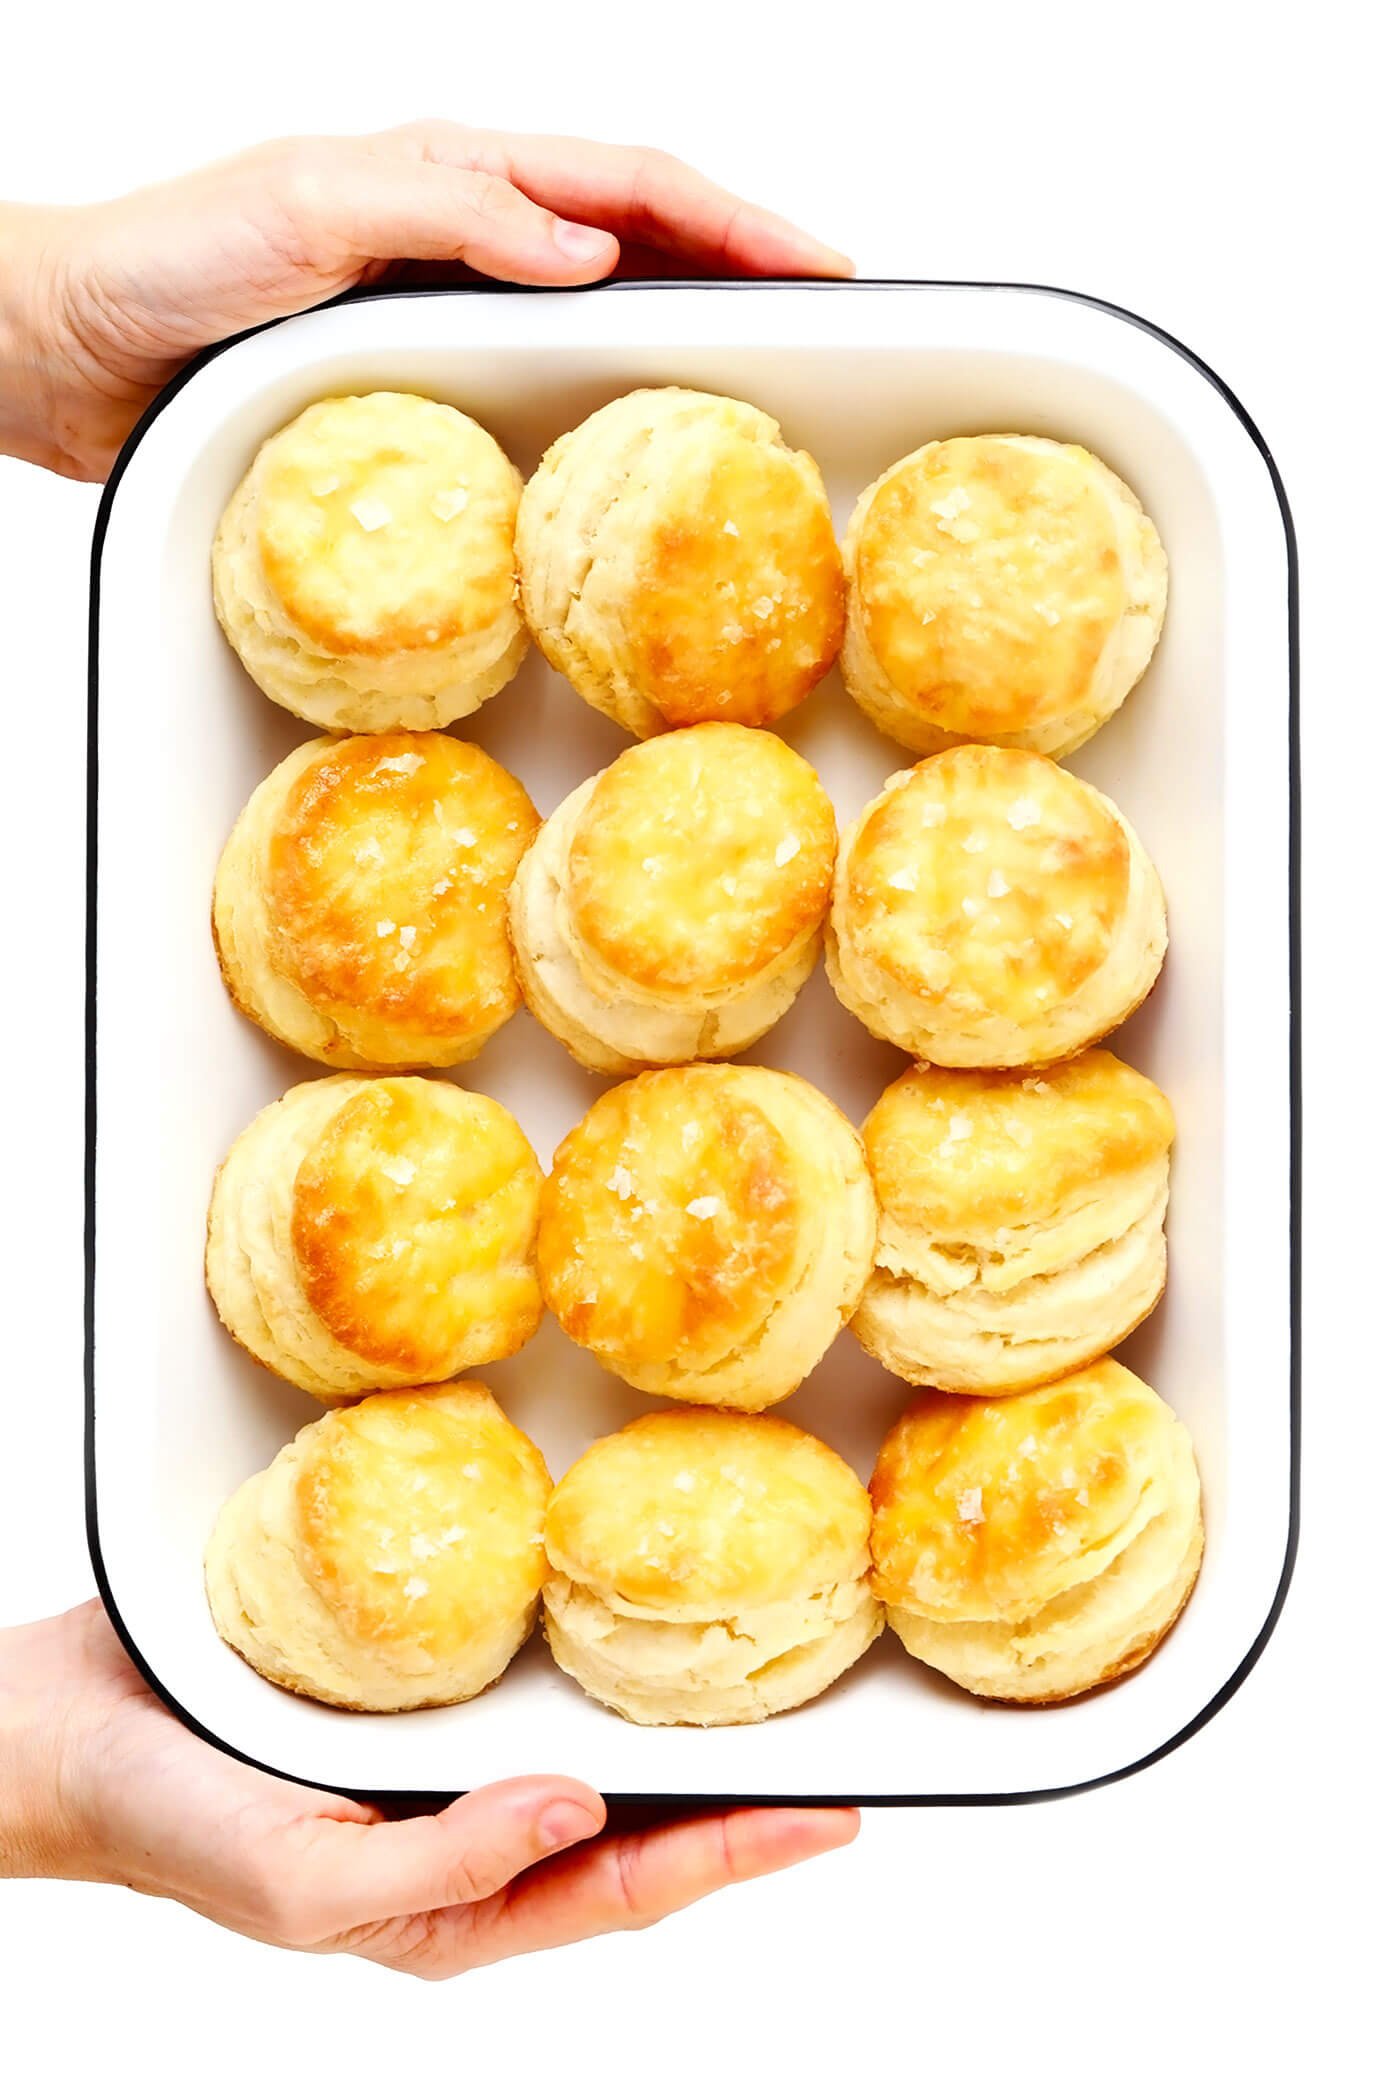 Homemade Biscuits in Pan